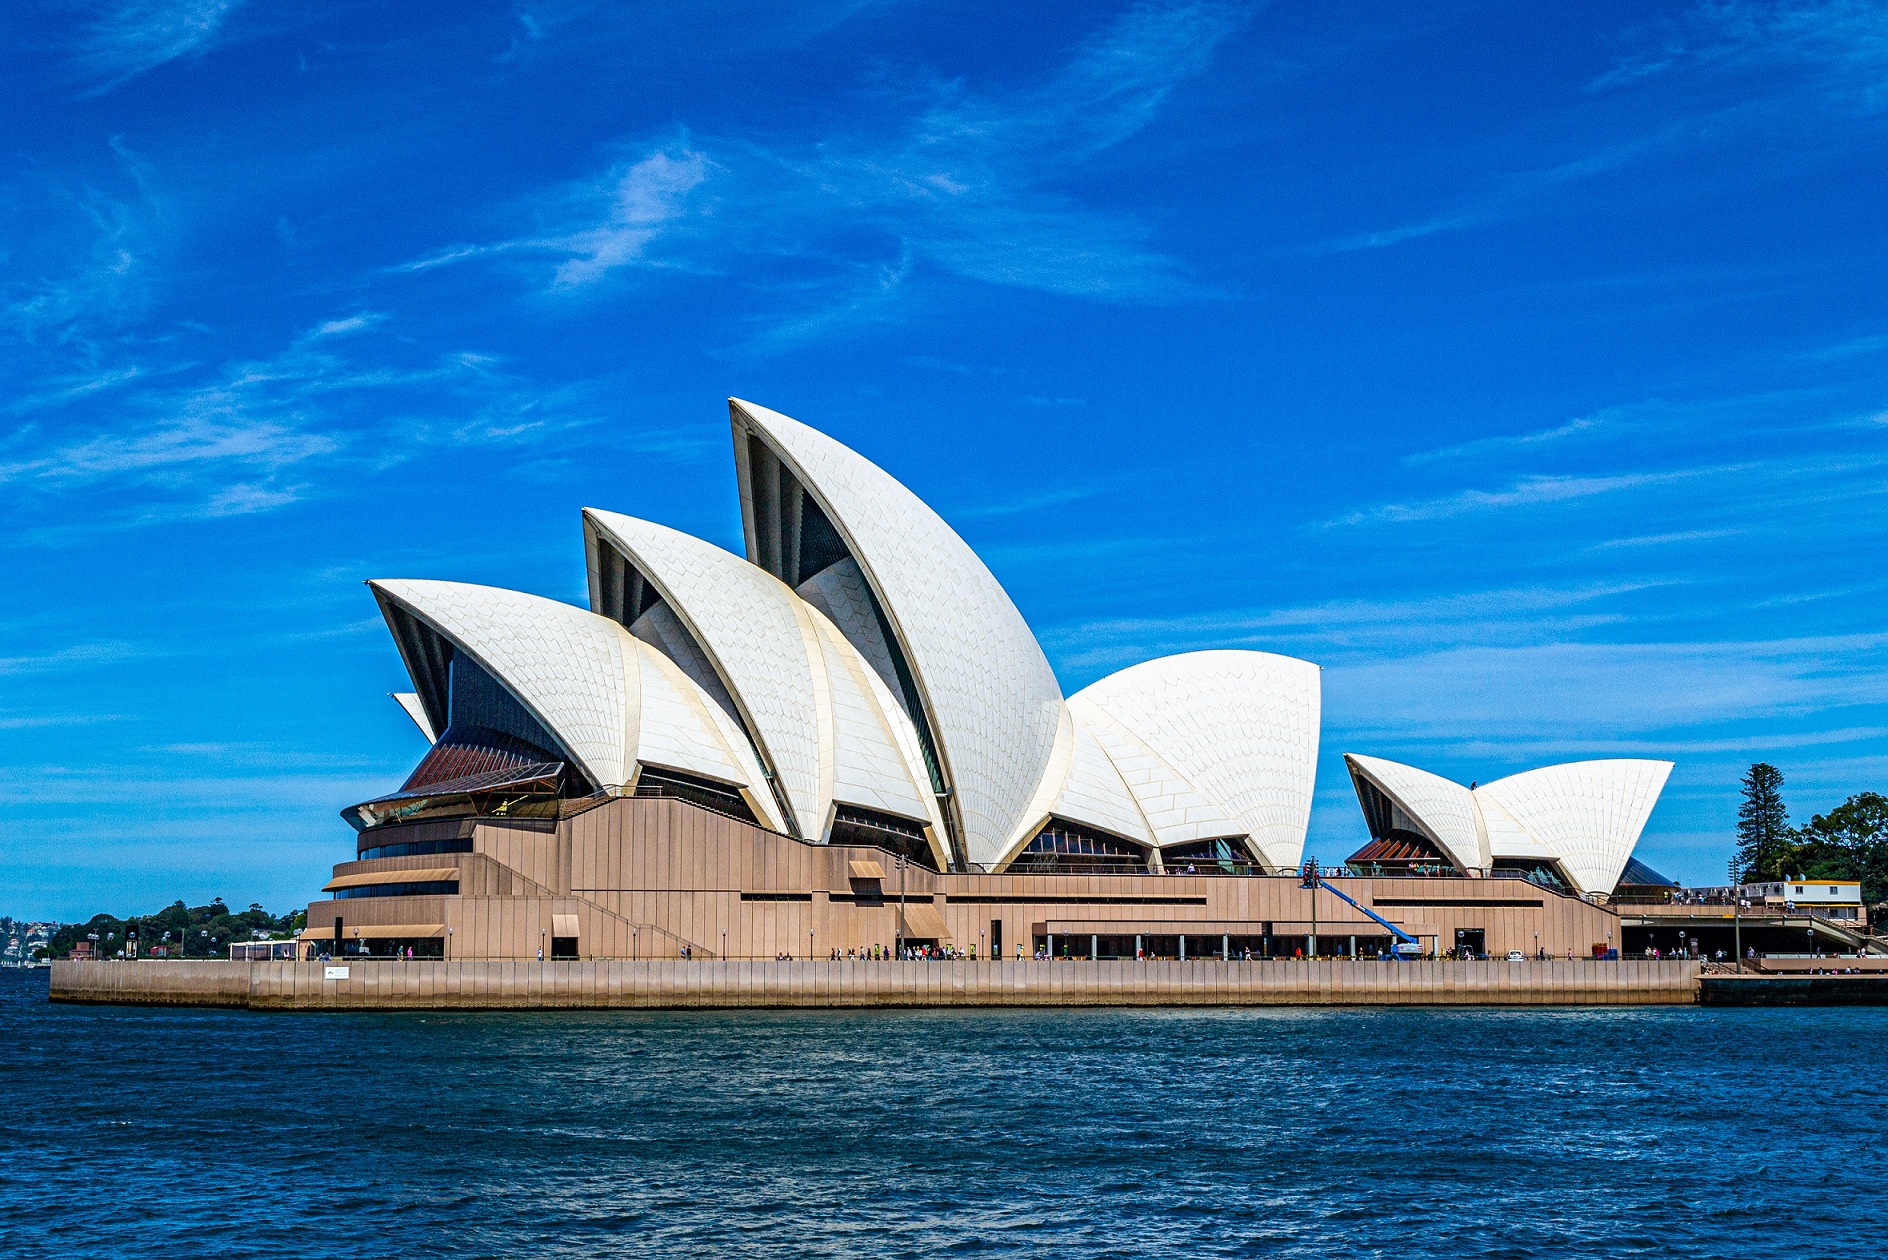 Maser help boost wireless connectivity at the Sydney Opera House